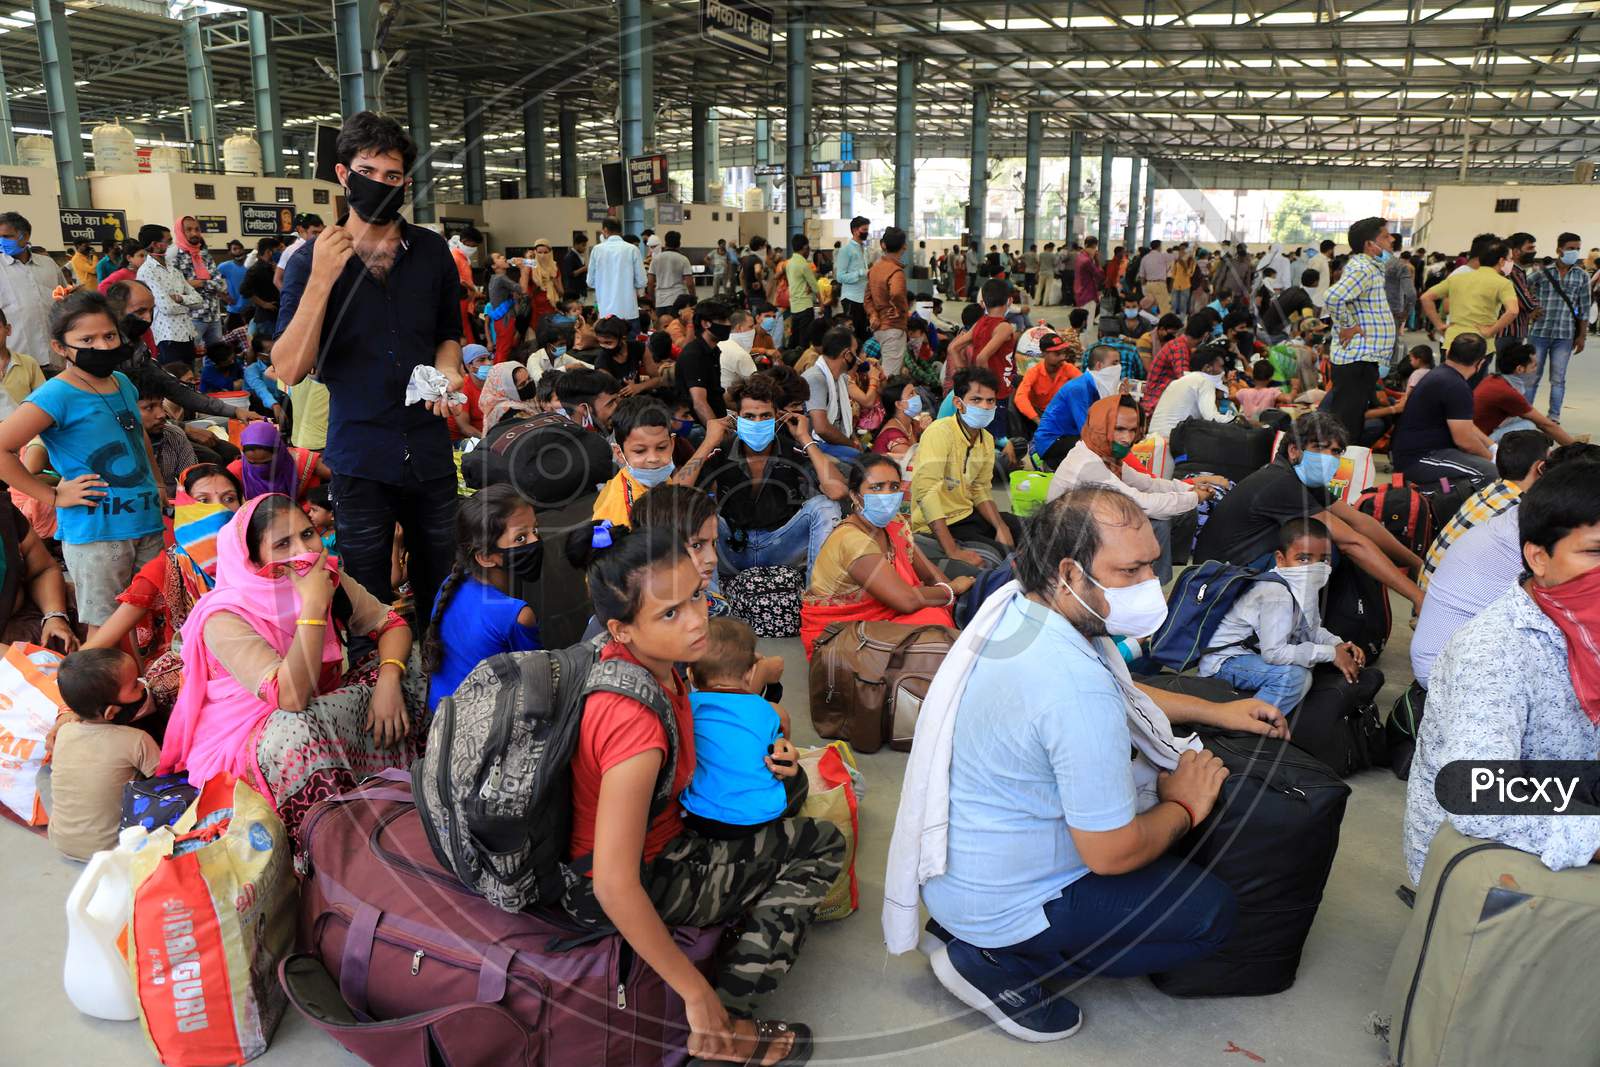 Migrants Who Arrived By A Special Train Wait To Board Buses For Their Native Villages During Extended Nationwide Lockdown Amidst Coronavirus Or COVID-19 Pandemic In Prayagraj, May 25, 2020.